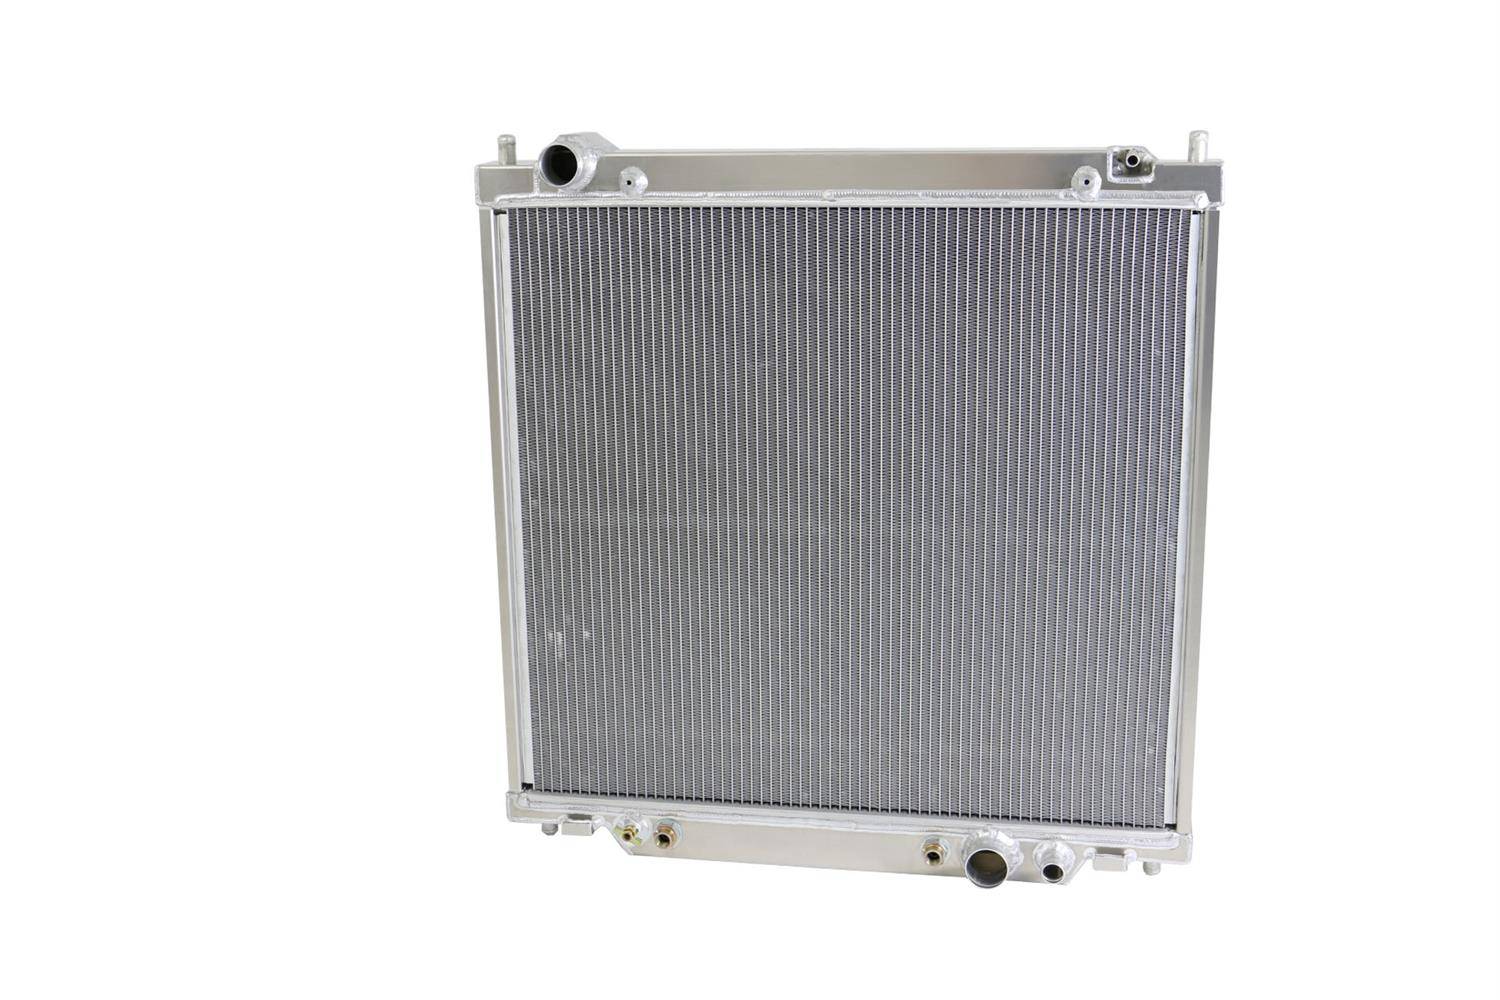 Wizard Cooling Inc - Wizard Cooling - 1999-2005 FORD F-250, F-350, F-450, F-550, Excursion (6.8L & 7.3L) Radiator Only - 2171-110